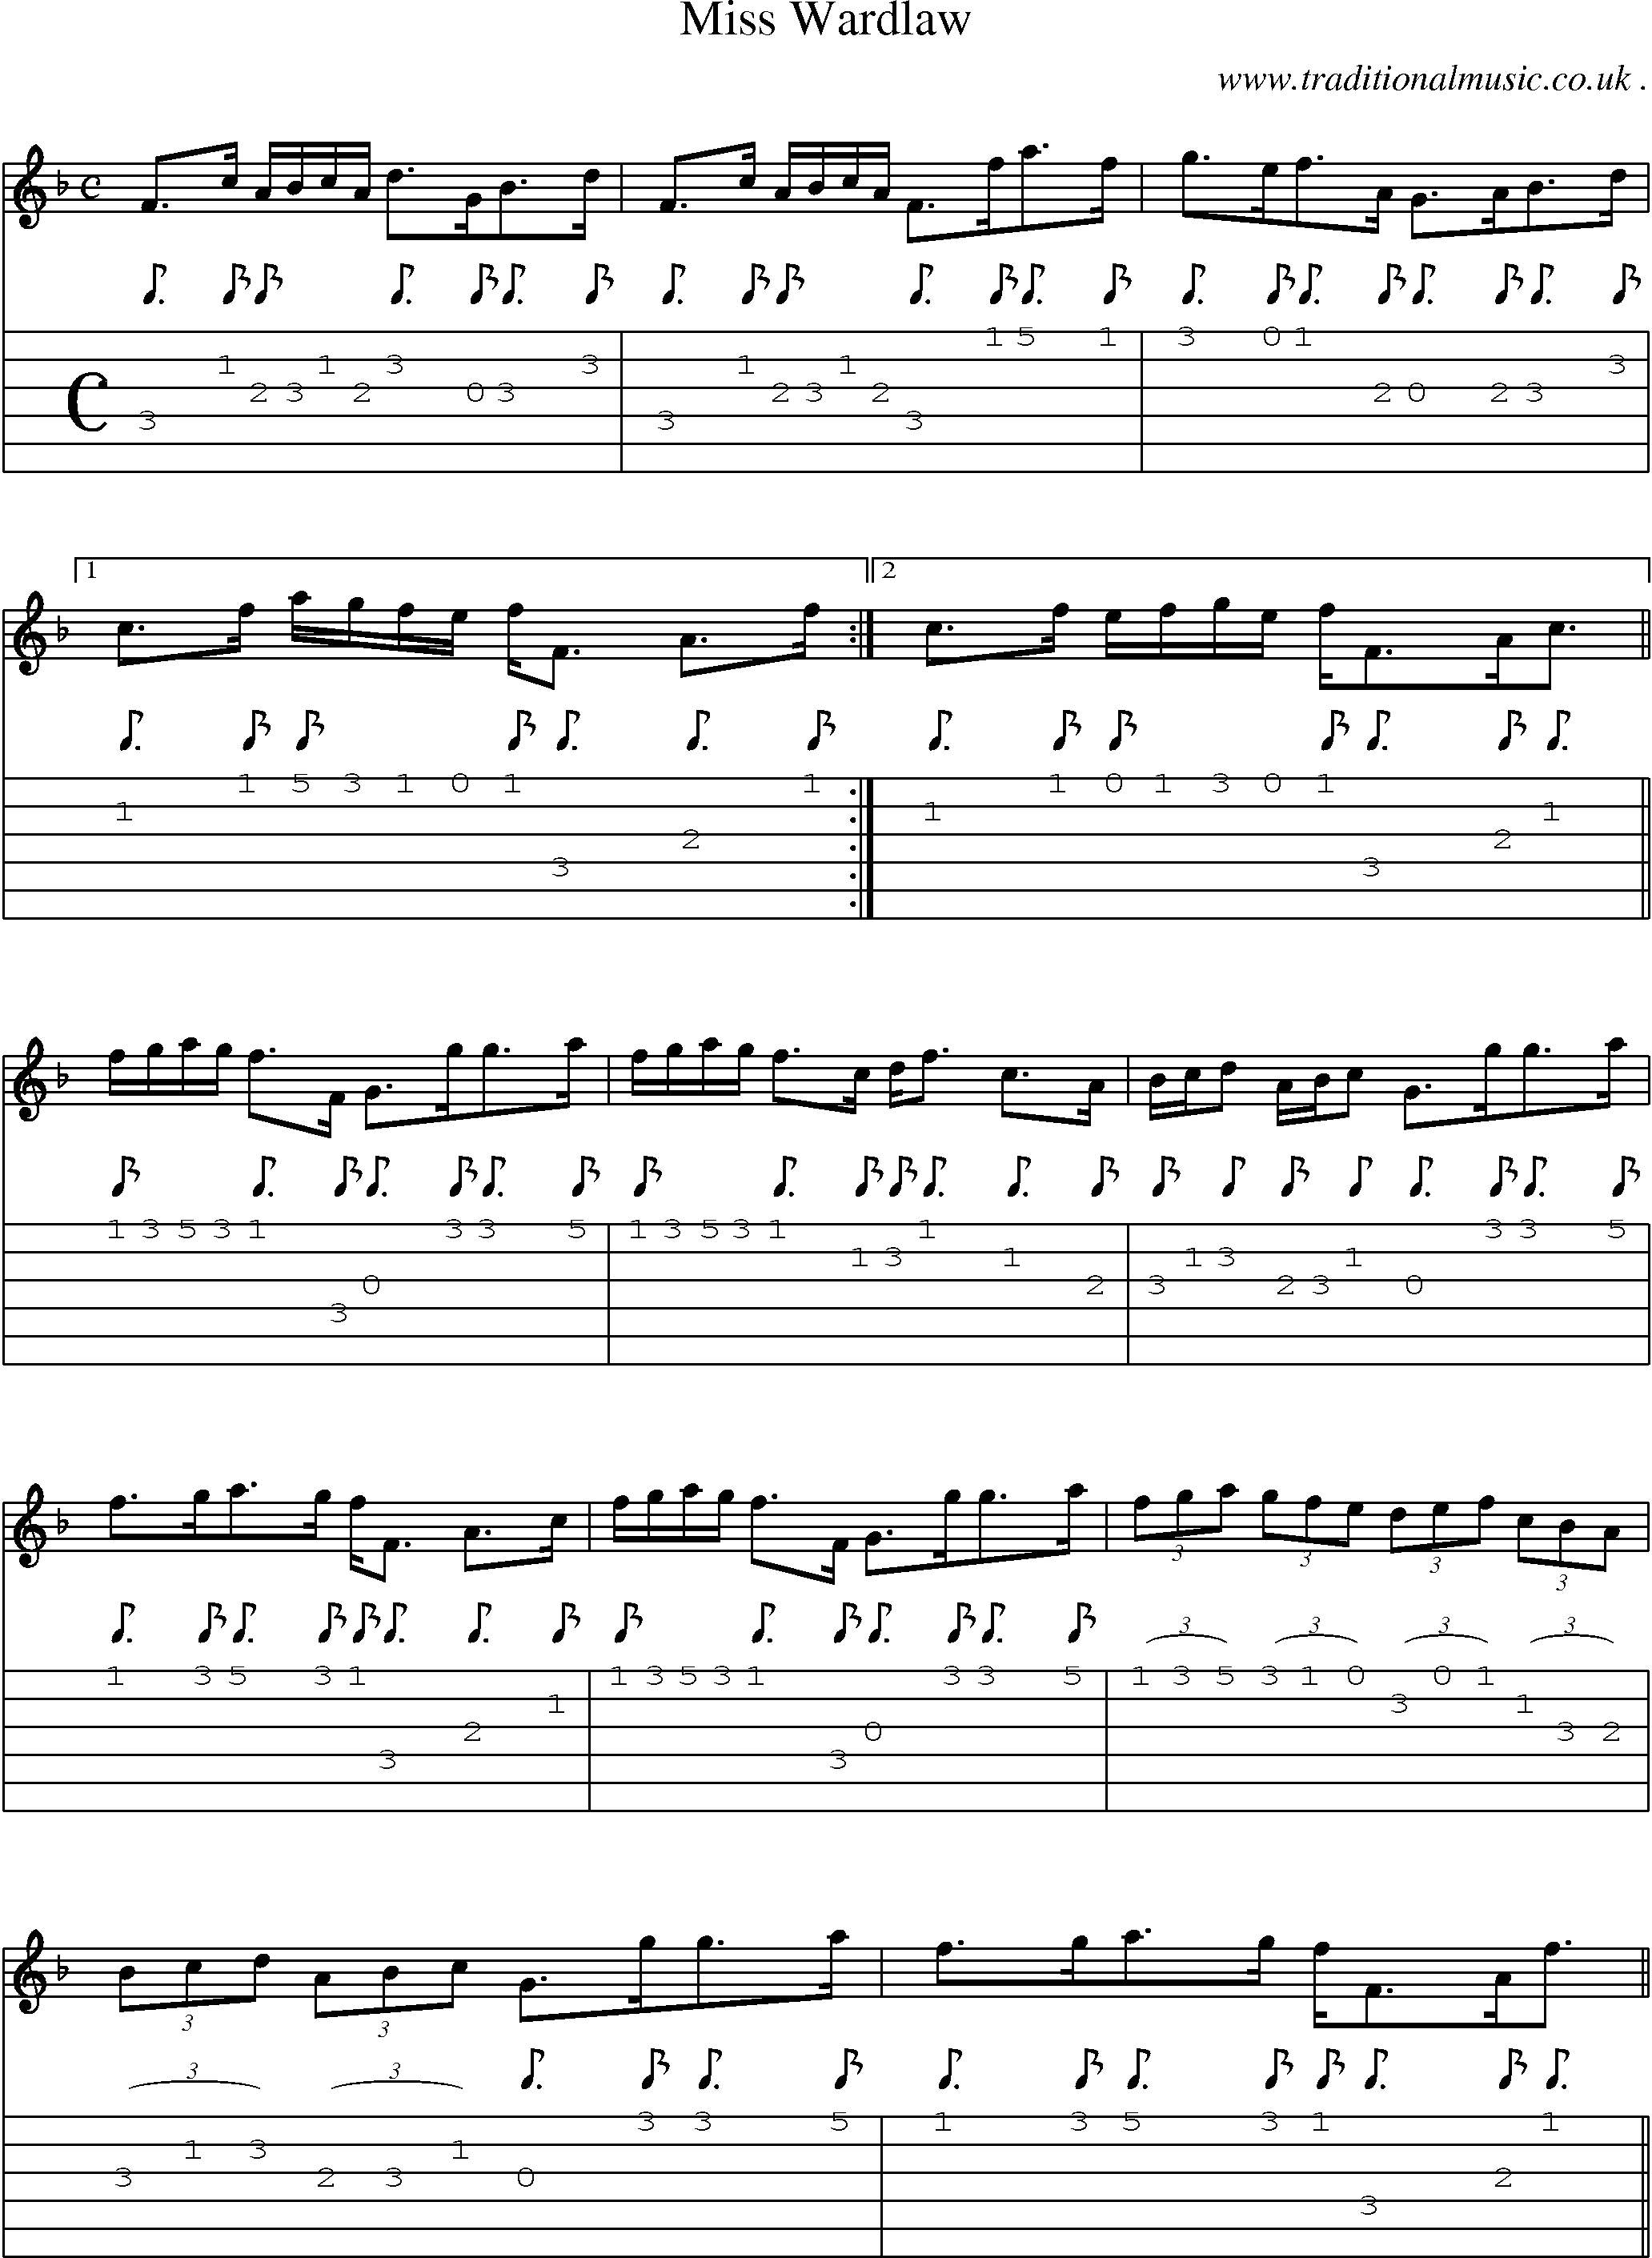 Sheet-music  score, Chords and Guitar Tabs for Miss Wardlaw